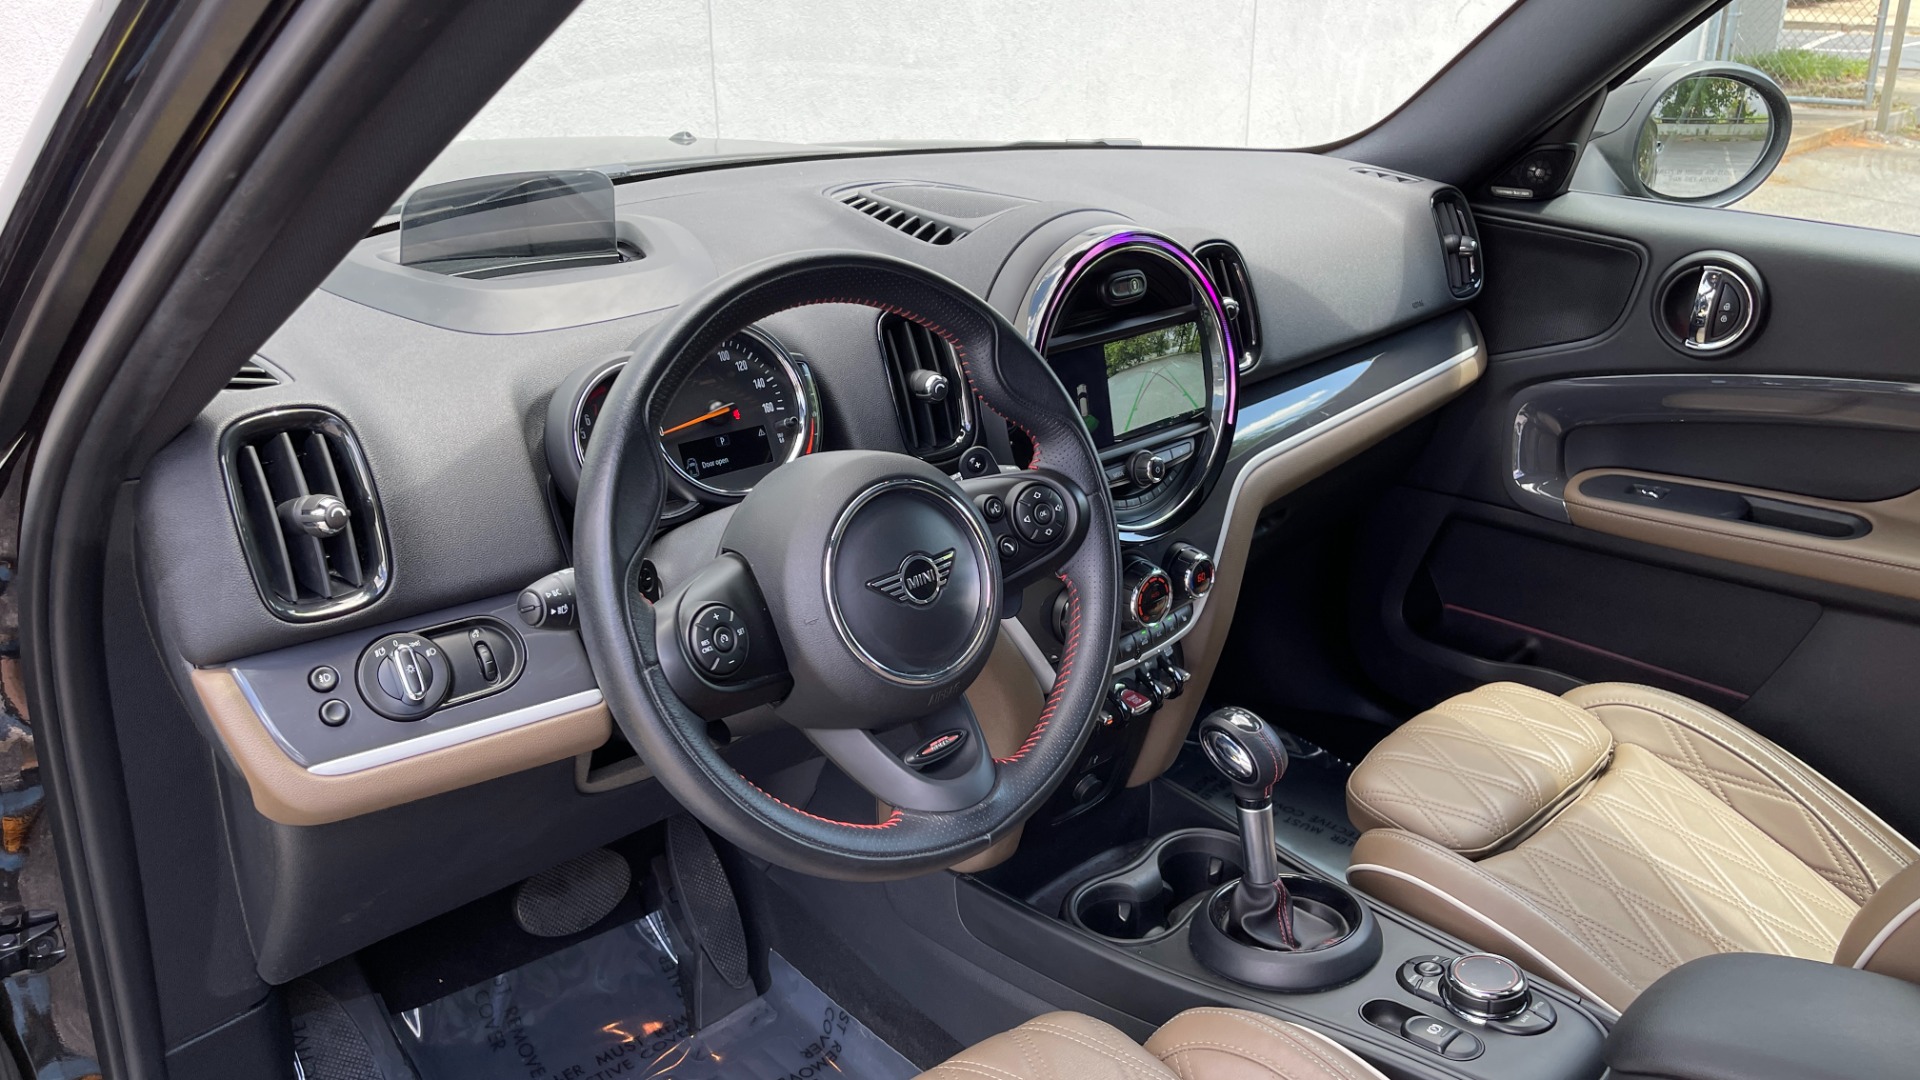 Used 2019 MINI Countryman Cooper S / ICONIC TRIM / TOUCHSCREEN NAV /SPORT AUTO / CONVENIENCE for sale $33,295 at Formula Imports in Charlotte NC 28227 6